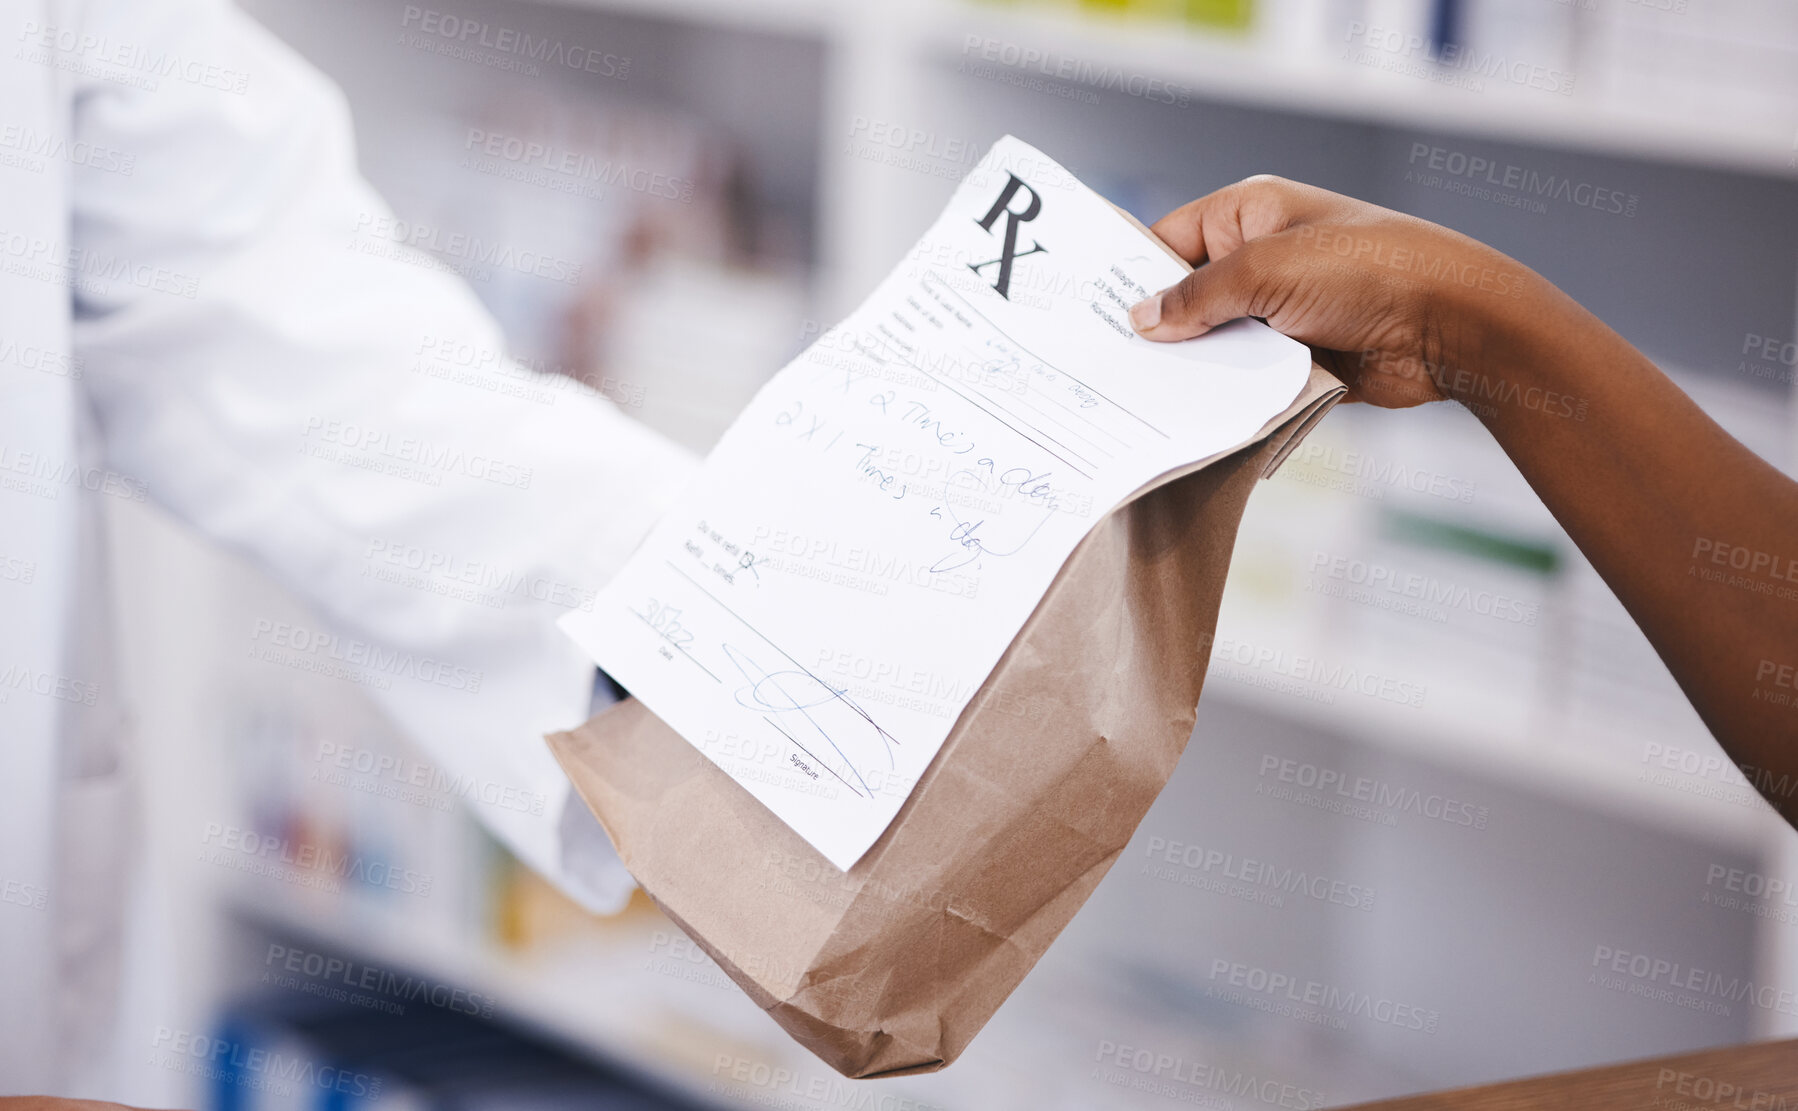 Buy stock photo Retail, medicine or pharmacist hands a person a bag in drugstore with healthcare prescription receipt. Zoom, shopping or doctor giving customer product, pills or package for medical pharmacy services